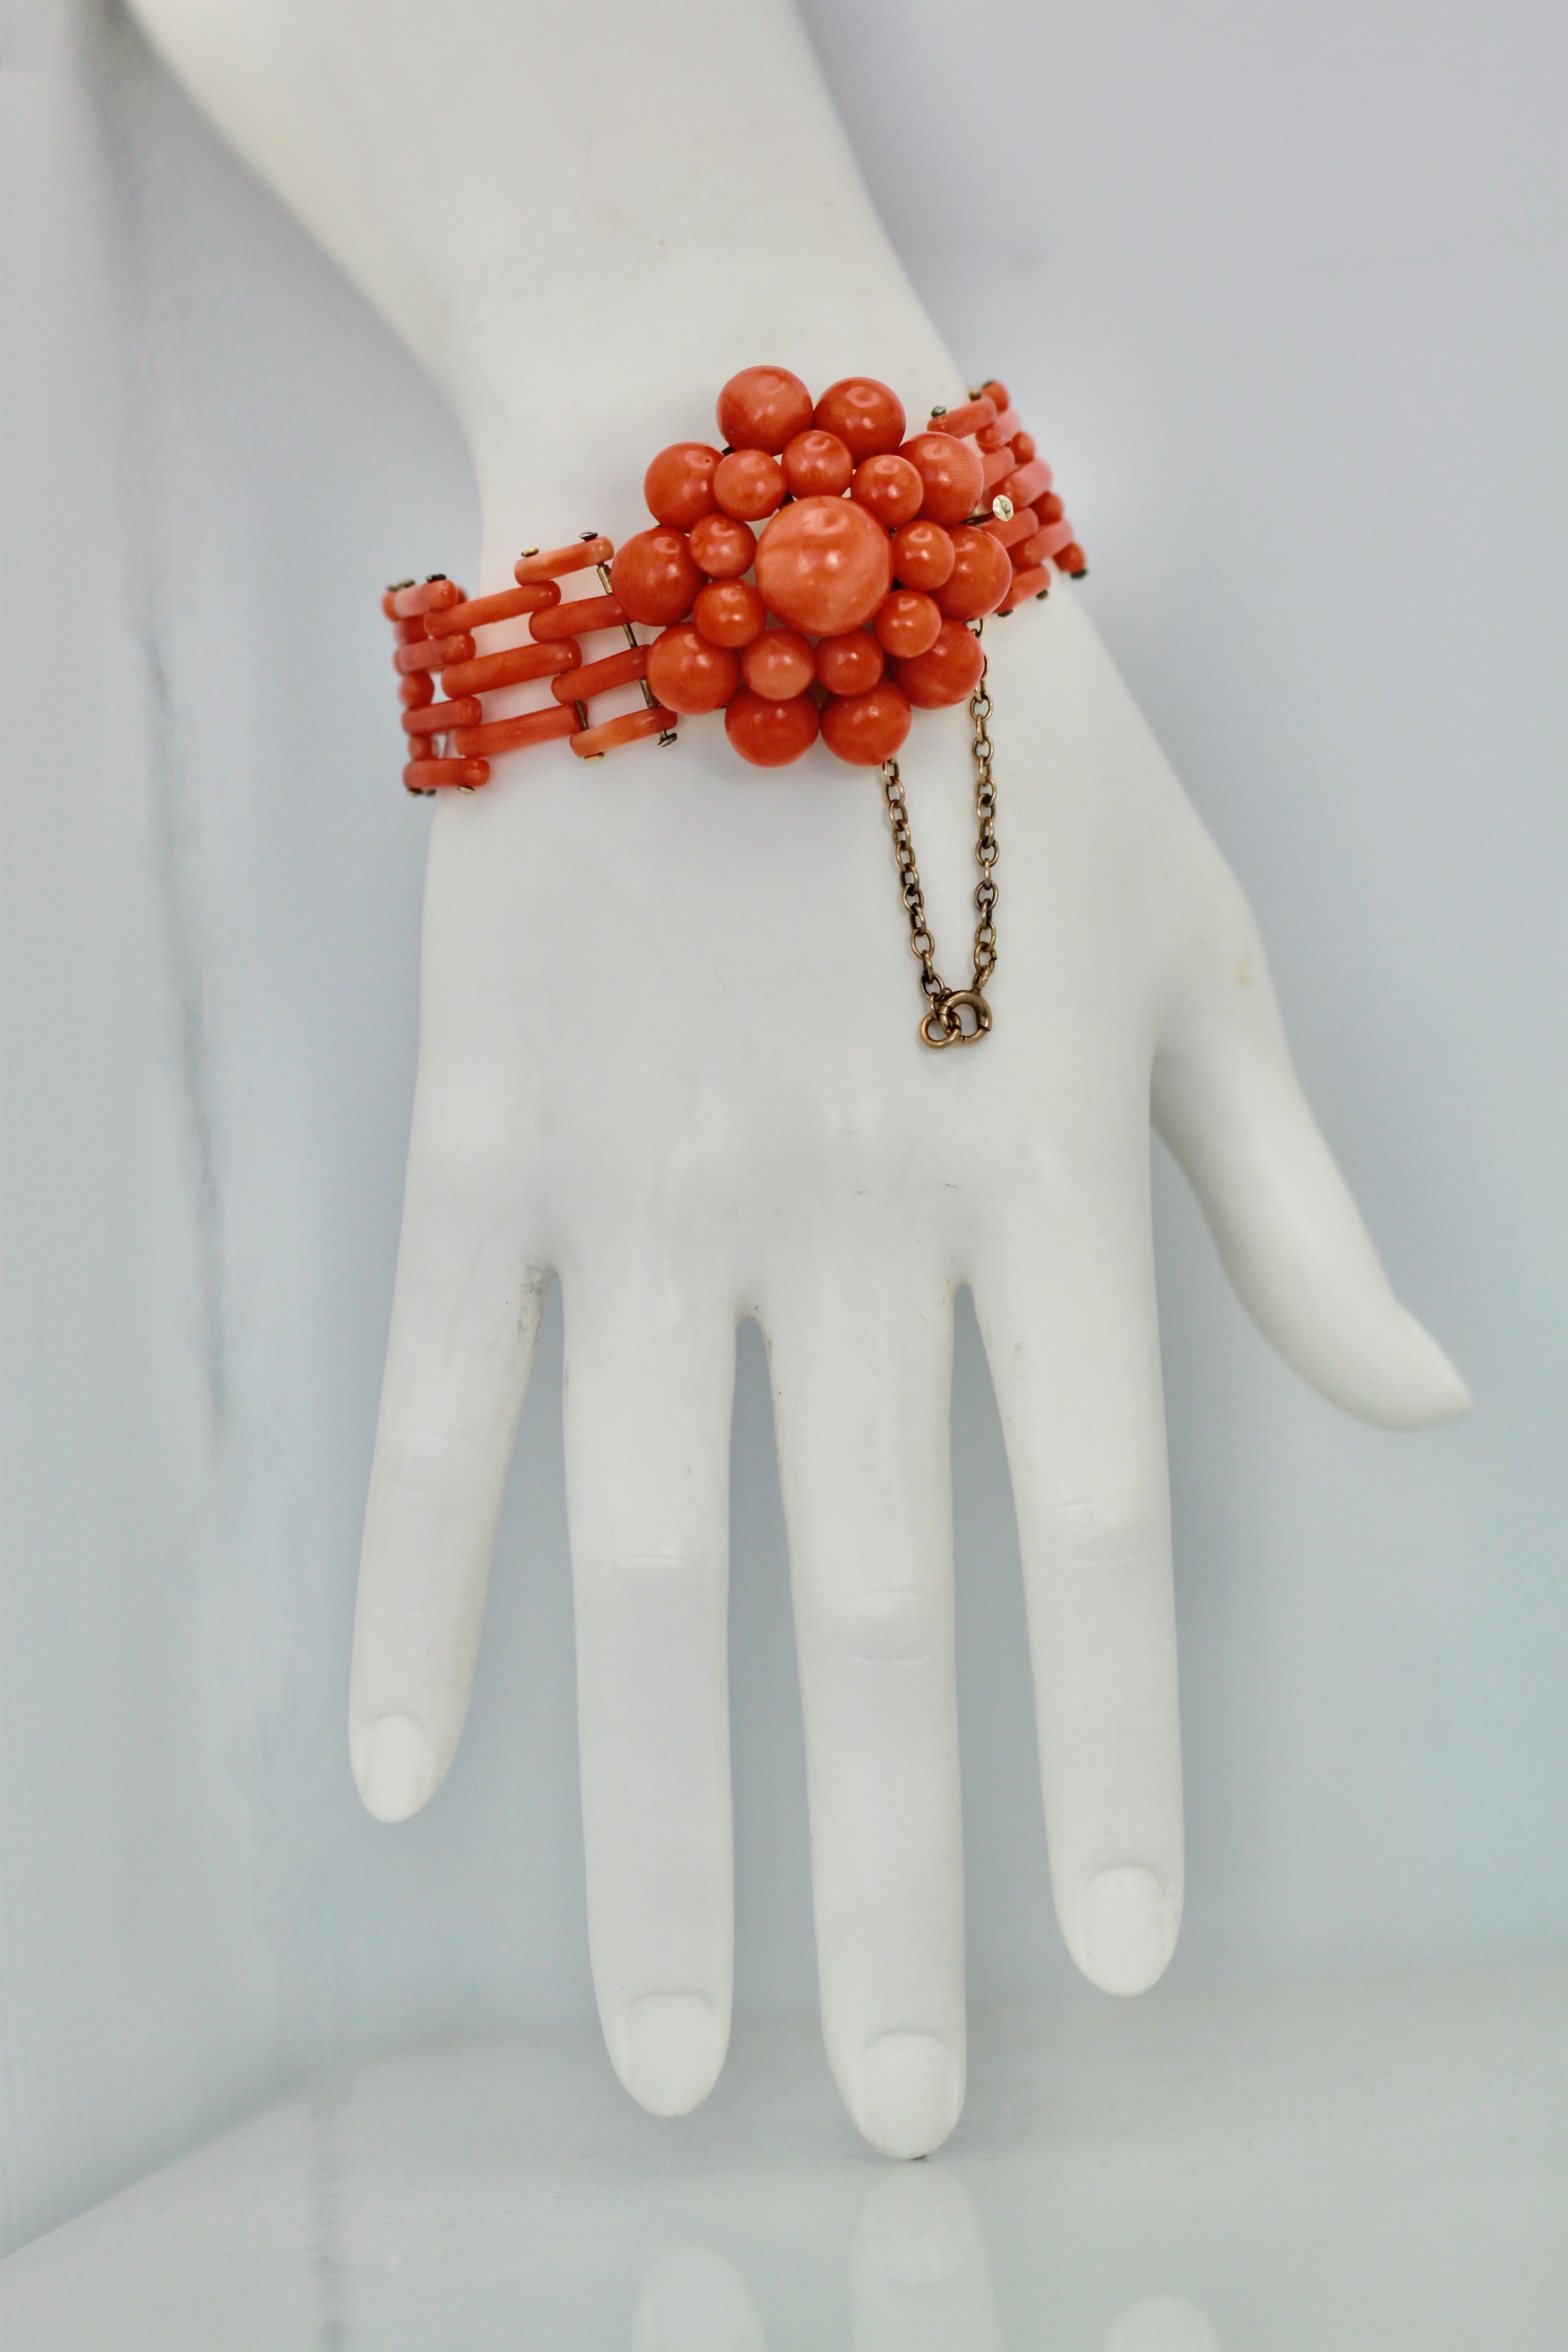 This vintage Coral Flower Bracelet comes out of Italy and is in gorgeous condition.  The bracelet is 6 1/2